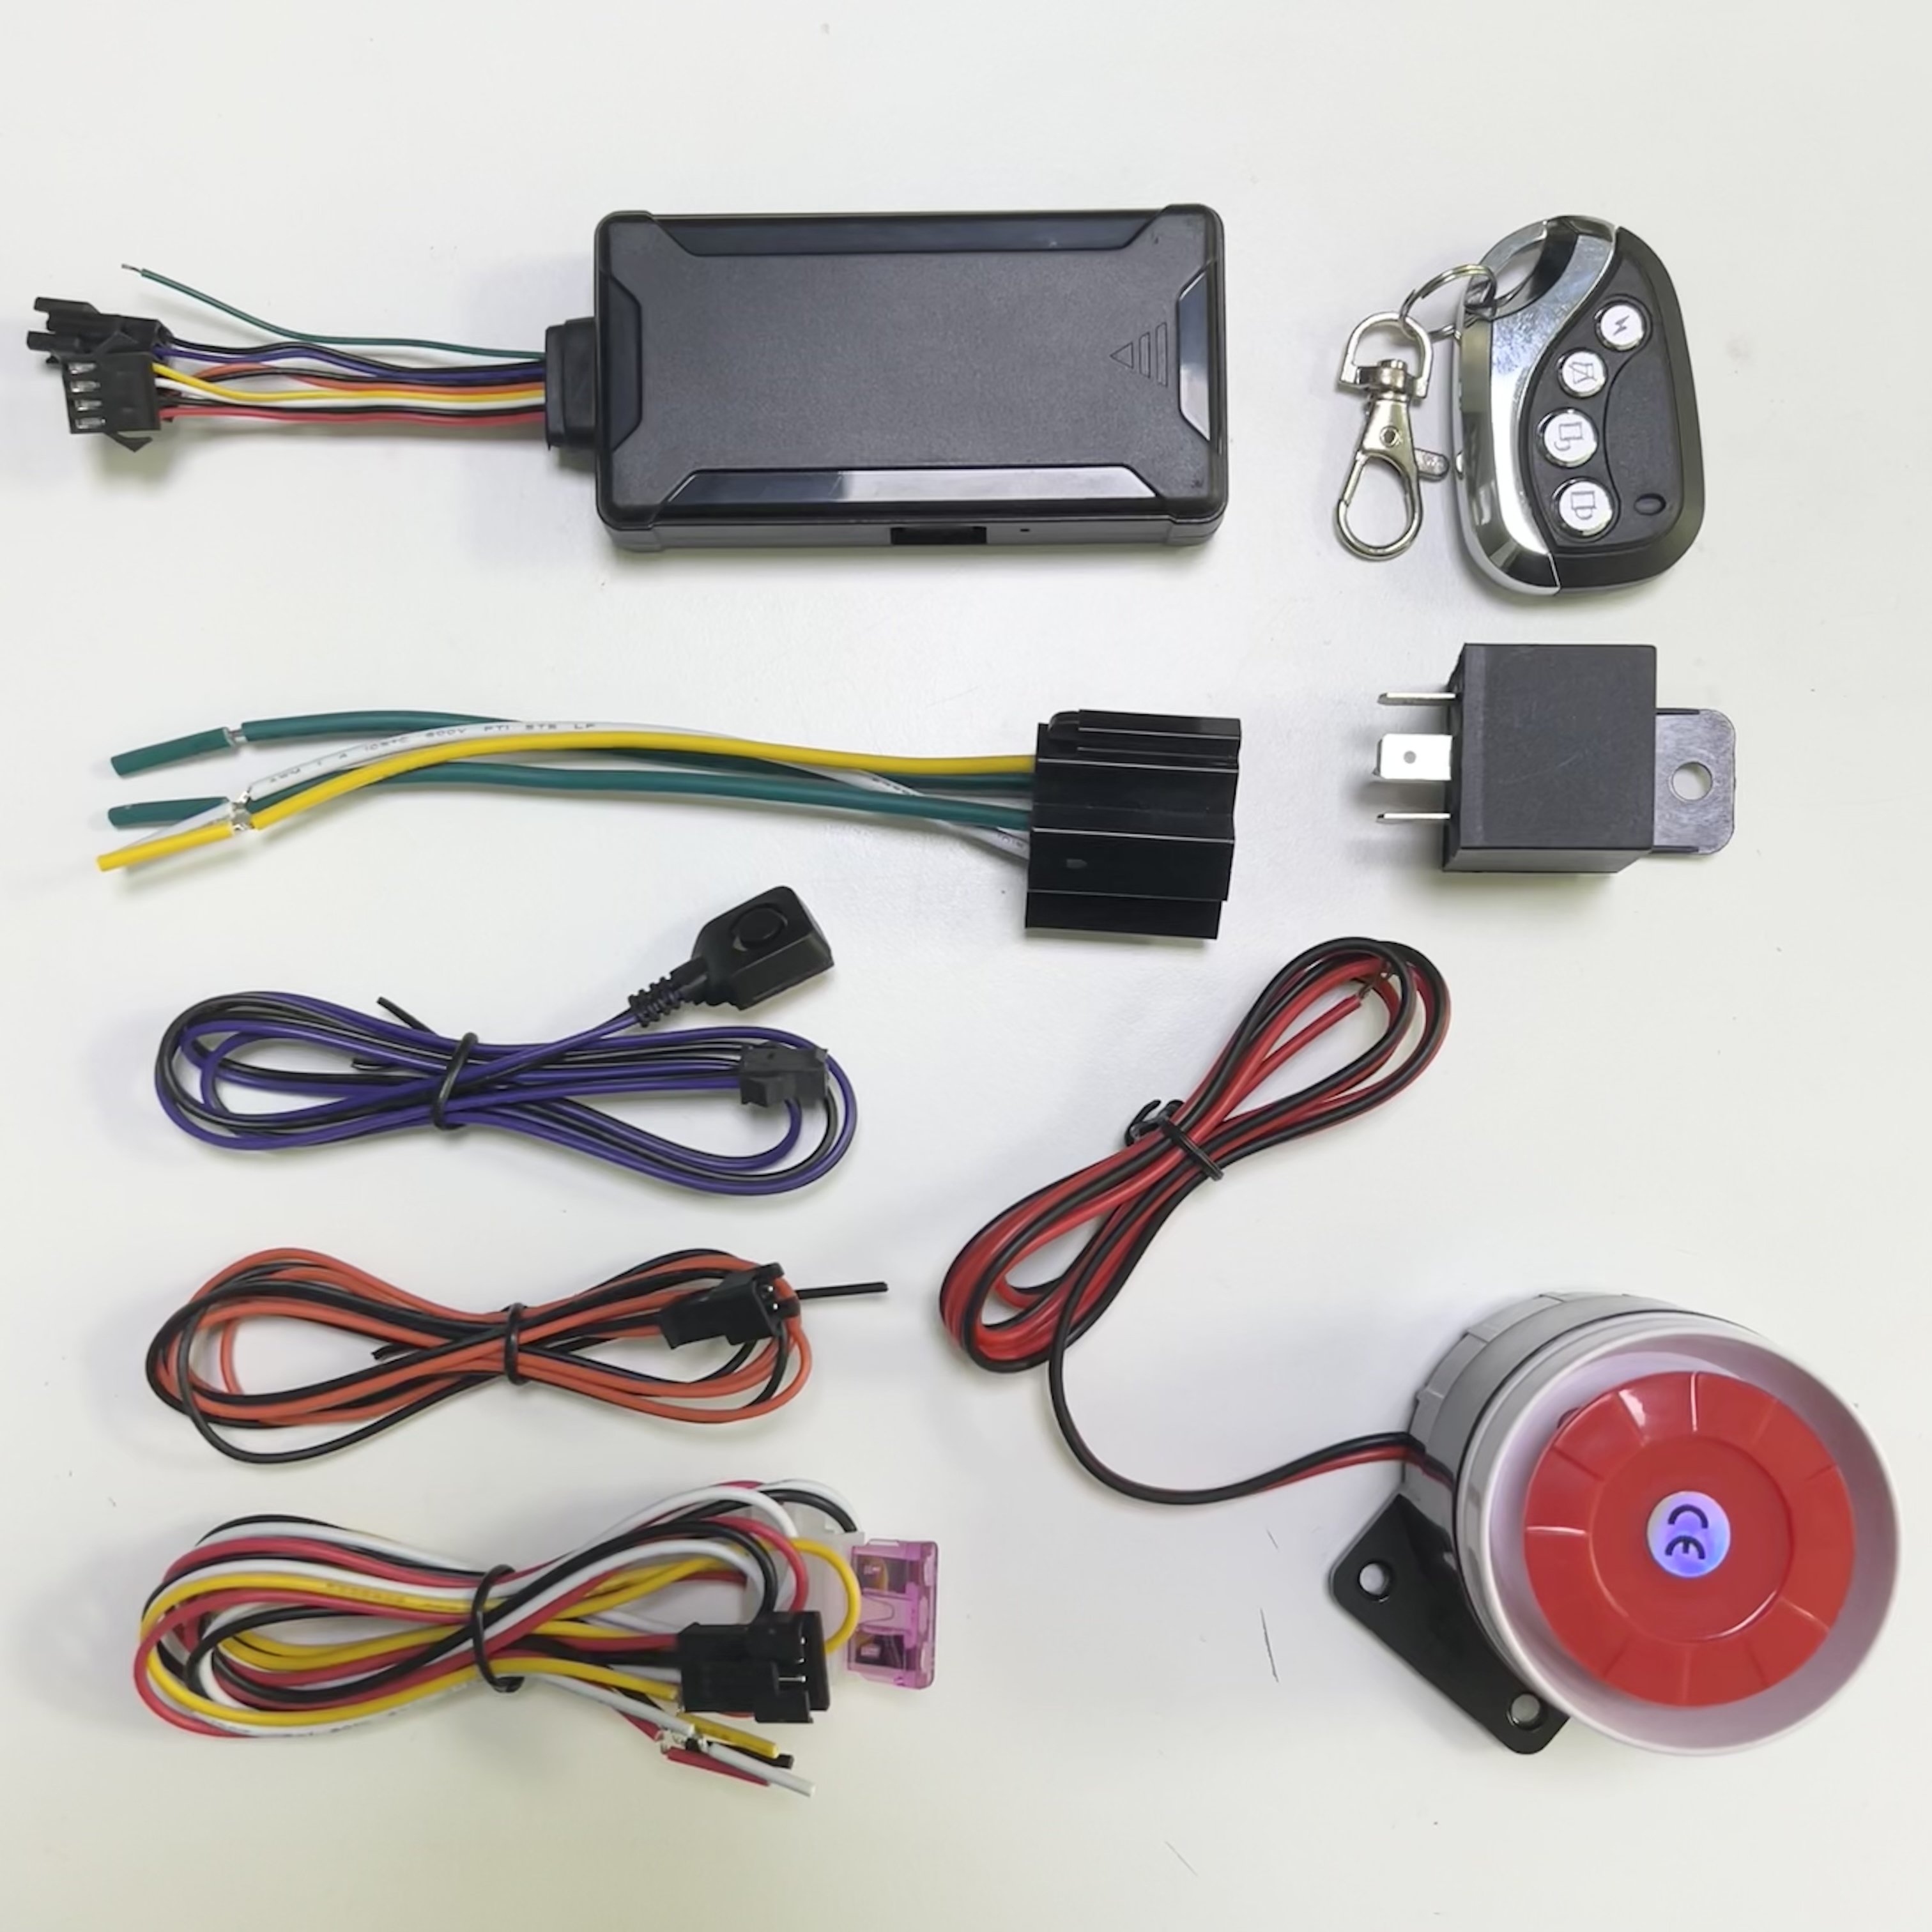 4G GPS Tracker for vehicles sales